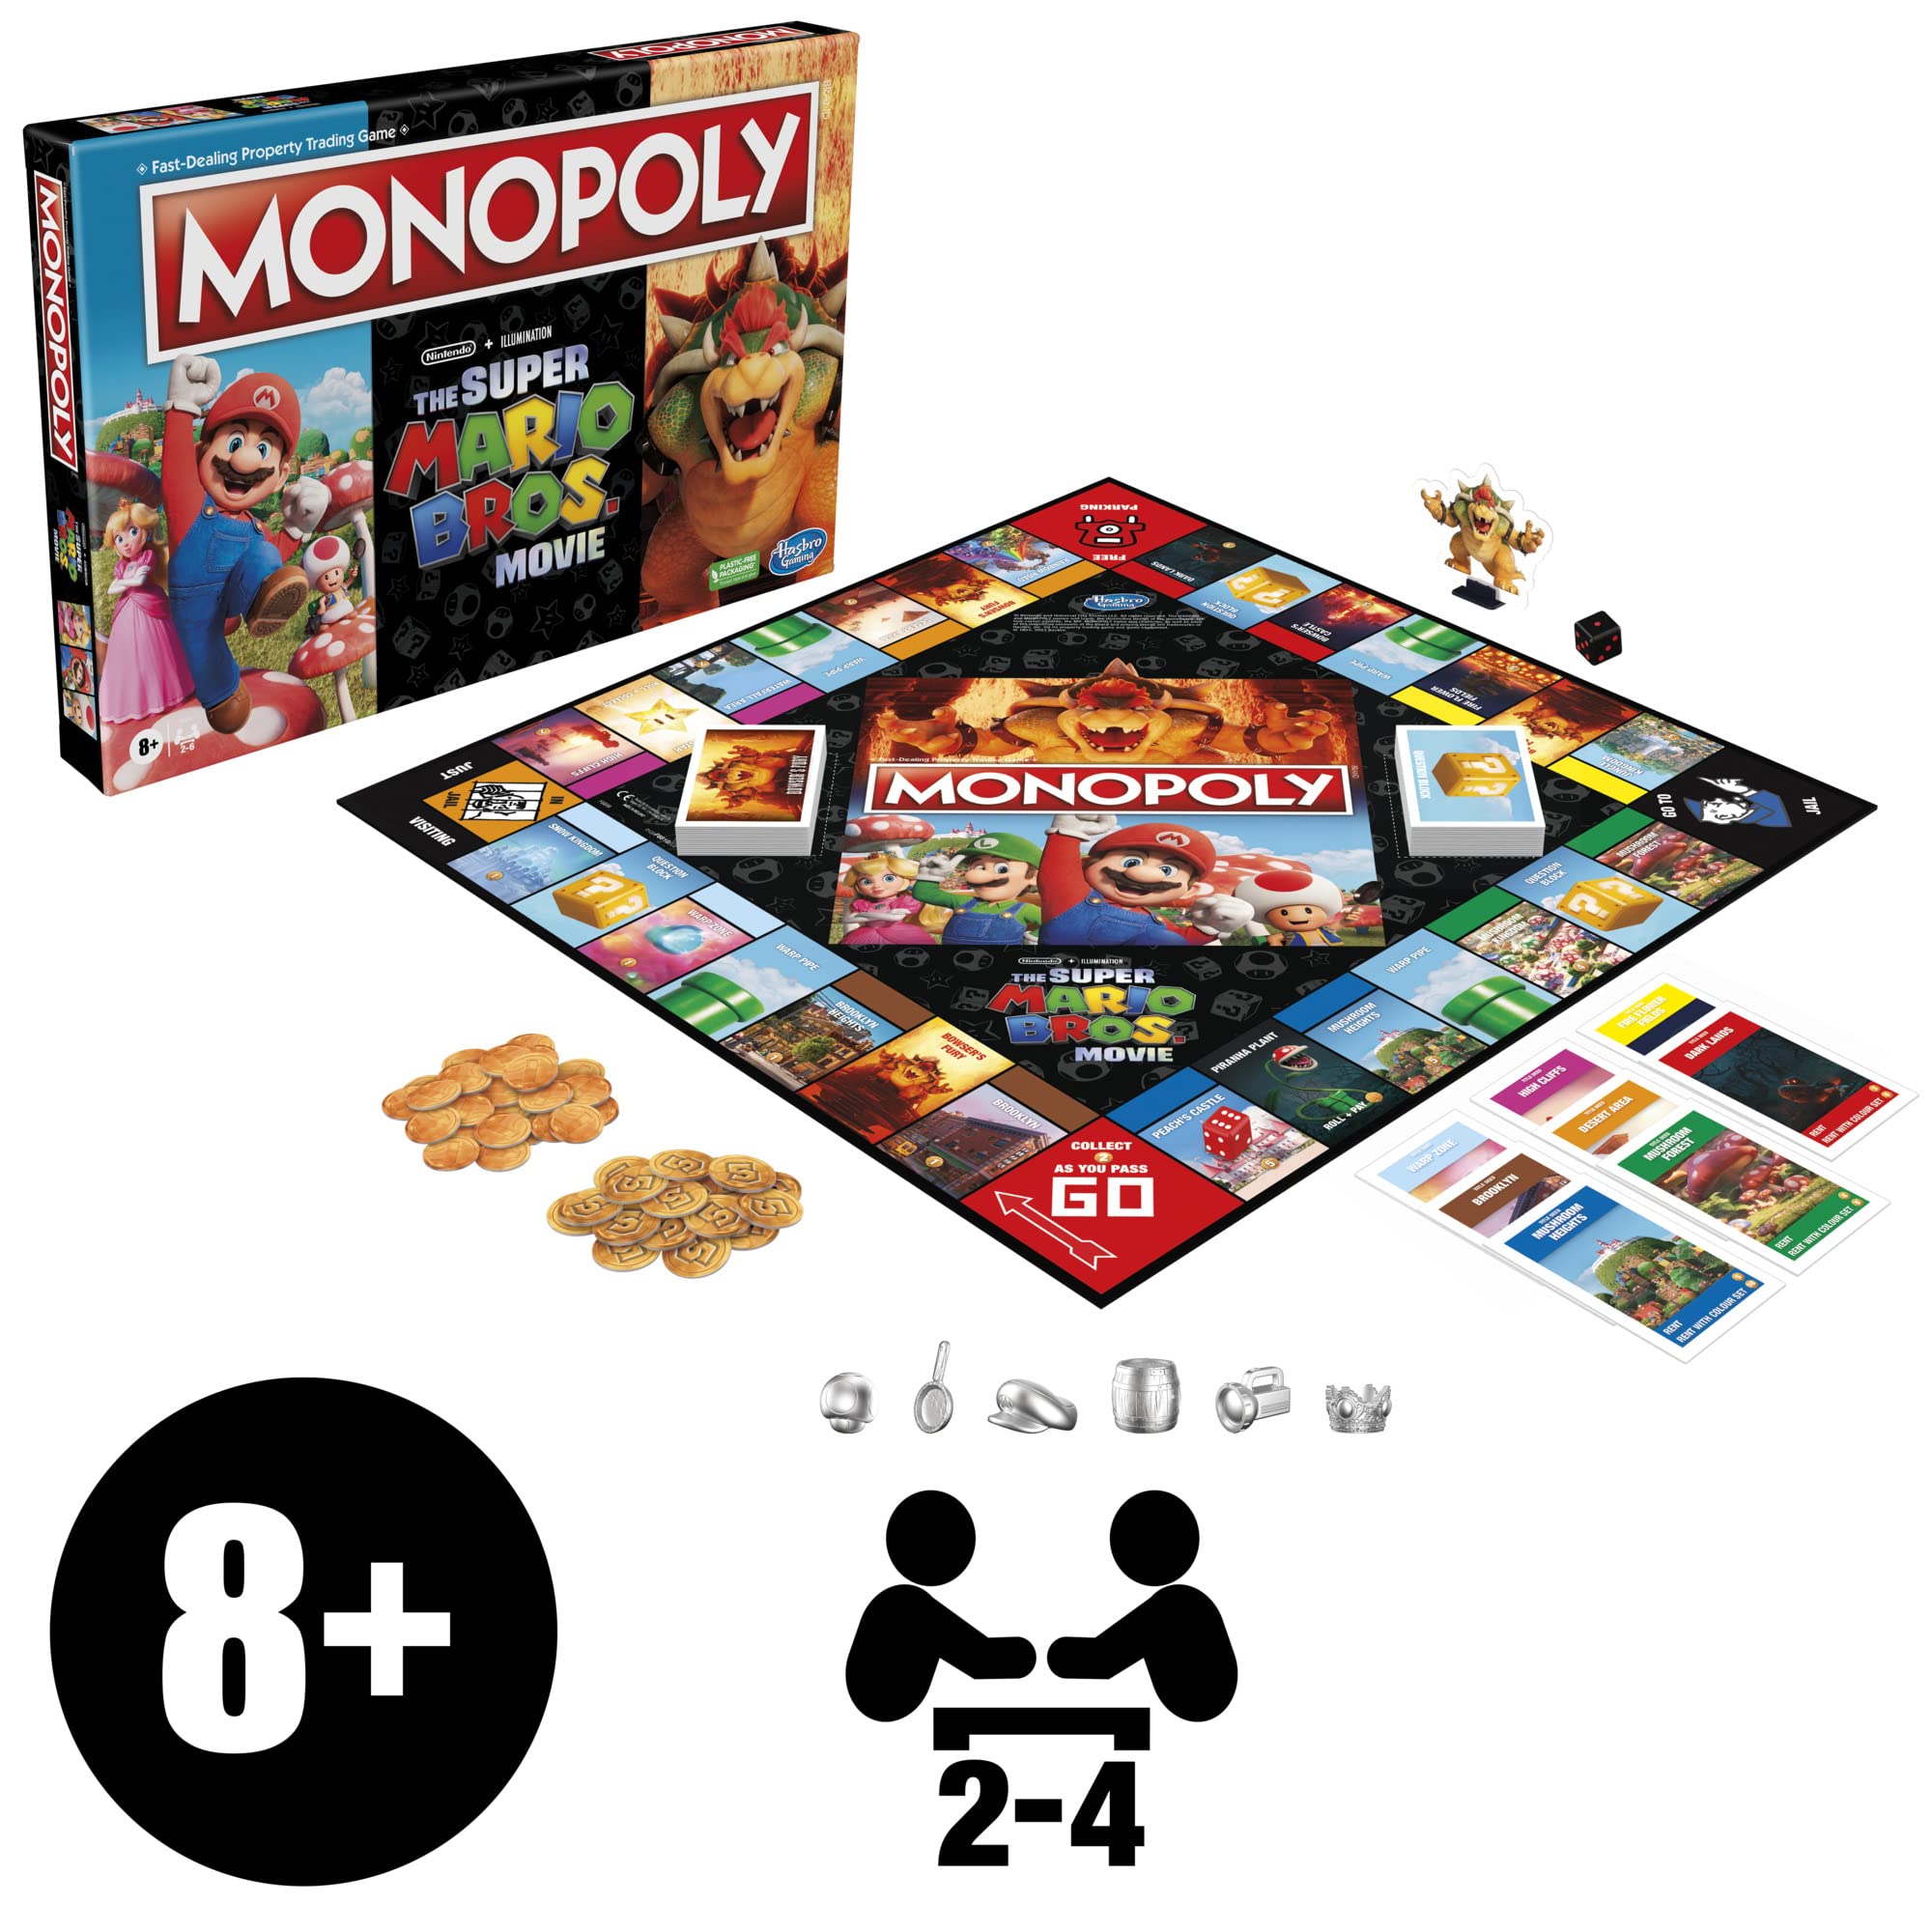 Hasbro Gaming Monopoly The Super Mario Bros.Movie Edition Kids Board Game | Family Games for Super Mario Fans | Includes Bowser Token | Ages 8+ | 2-6 Players